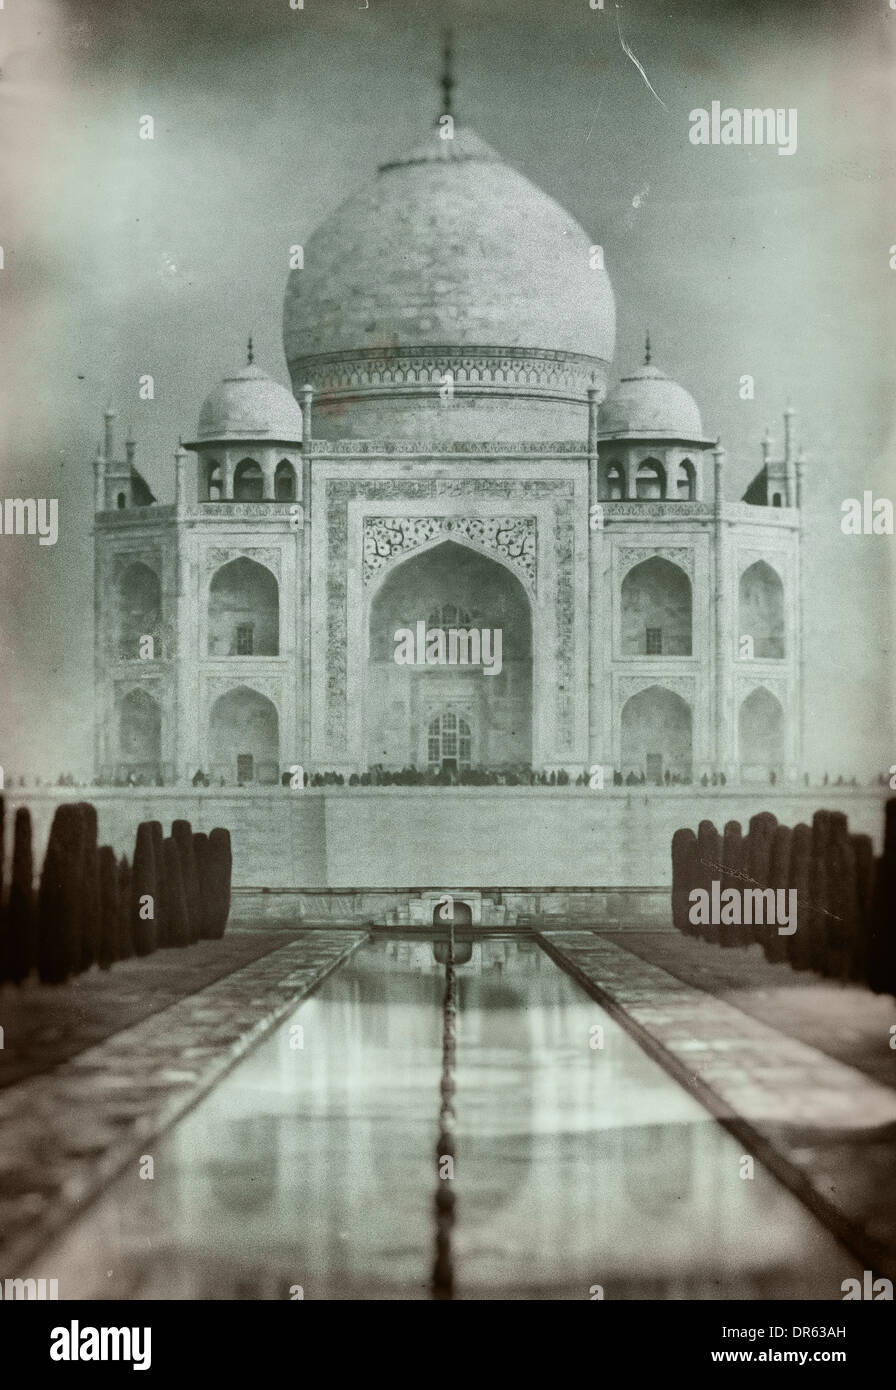 Taj Mahal in India. Old retro-styled film imagery with grain and scratches Stock Photo